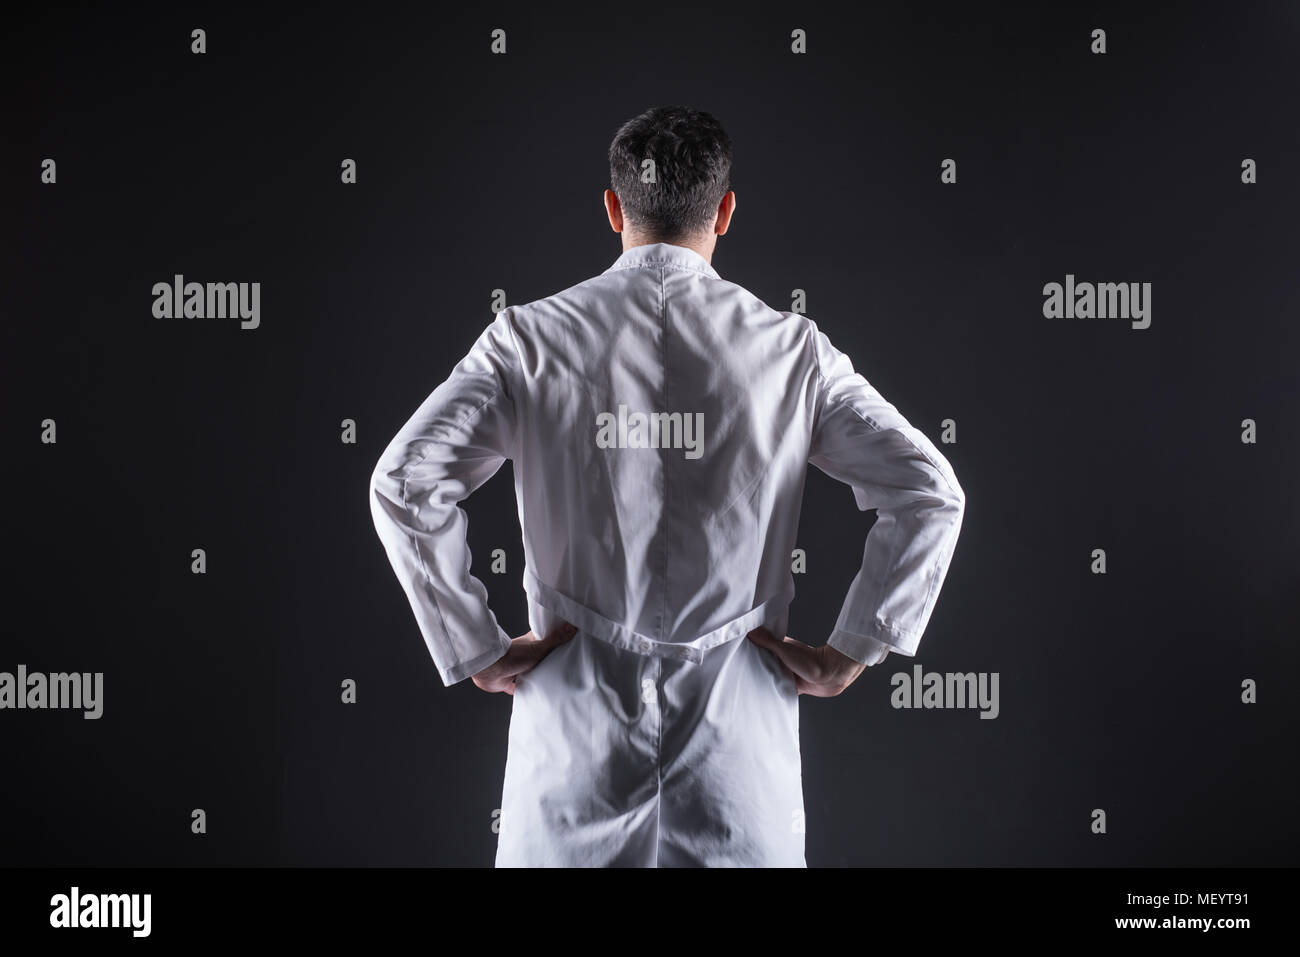 Smart handsome man wearing a labcoat Stock Photo